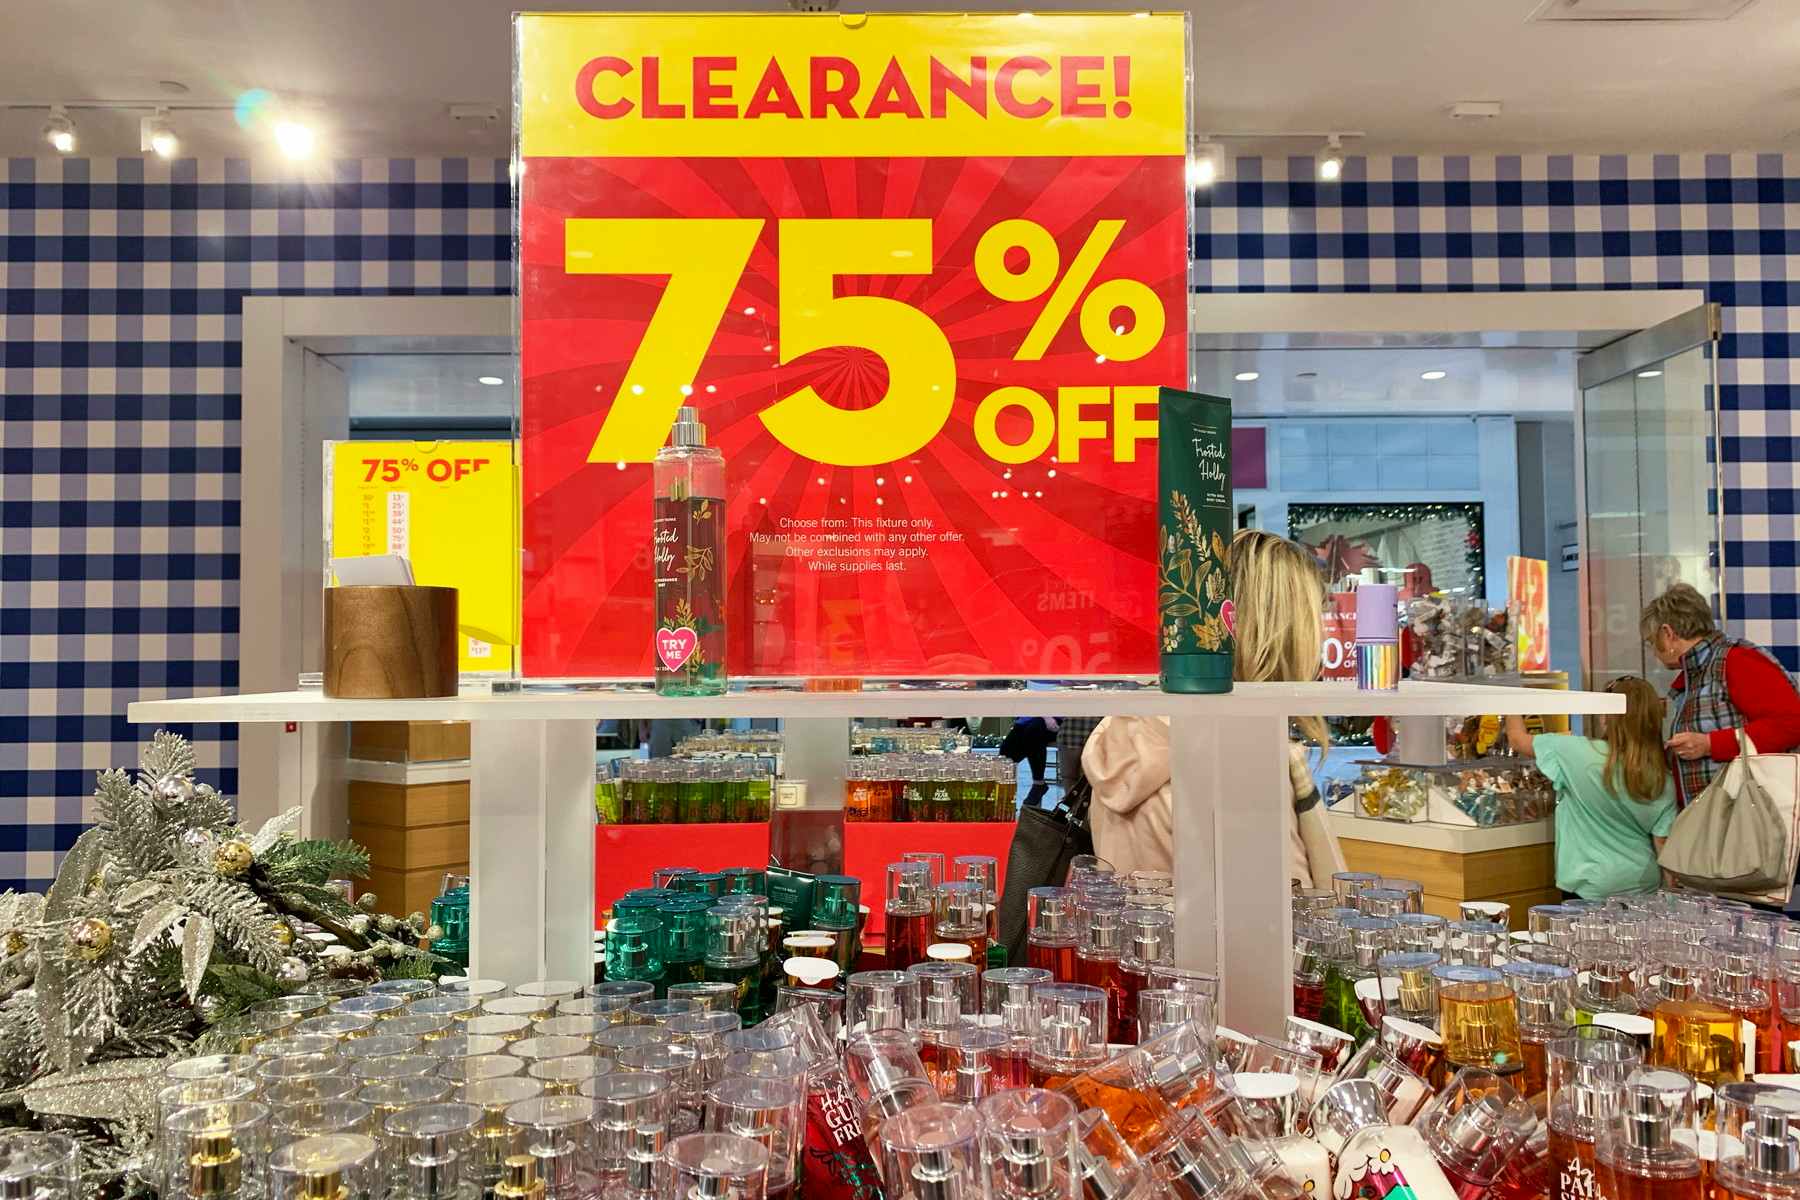 Bath & Body Works semi annual sale 75% off clearance sign on a shelf in the store.